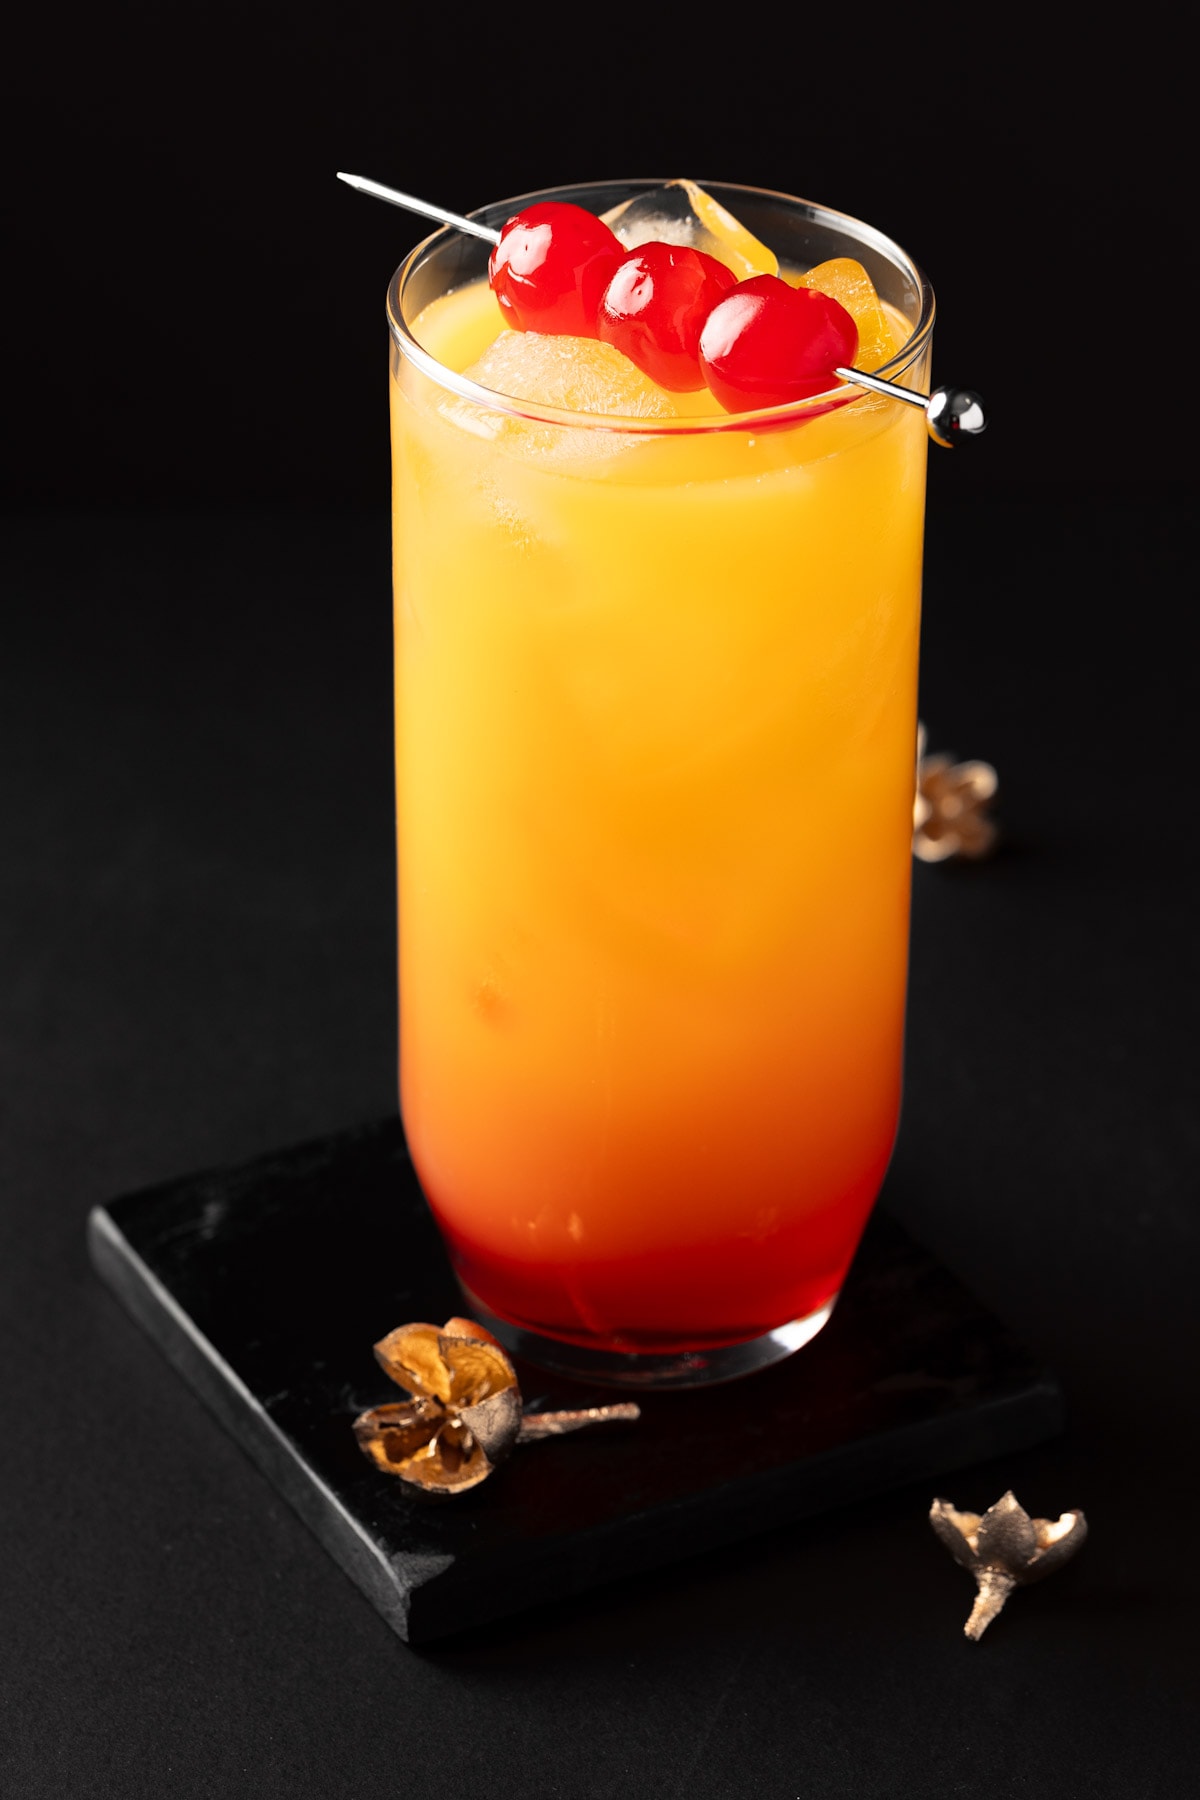 An yellow and red Tequila Sunrise Cocktail with pineapple juice, on a black coaster with a black background.